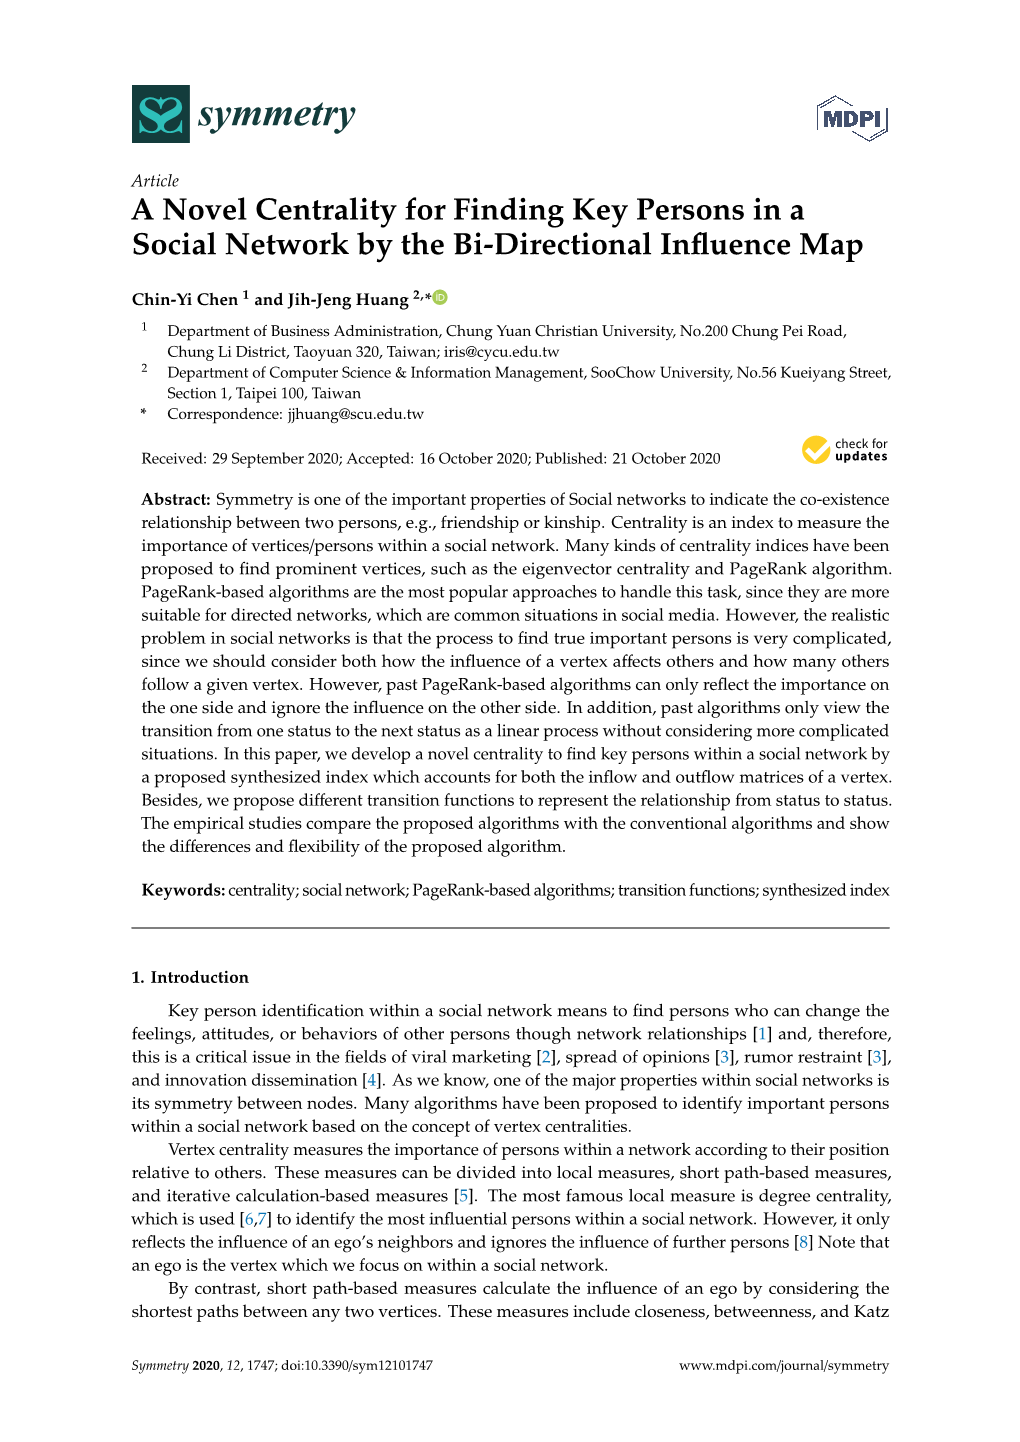 A Novel Centrality for Finding Key Persons in a Social Network by the Bi-Directional Inﬂuence Map